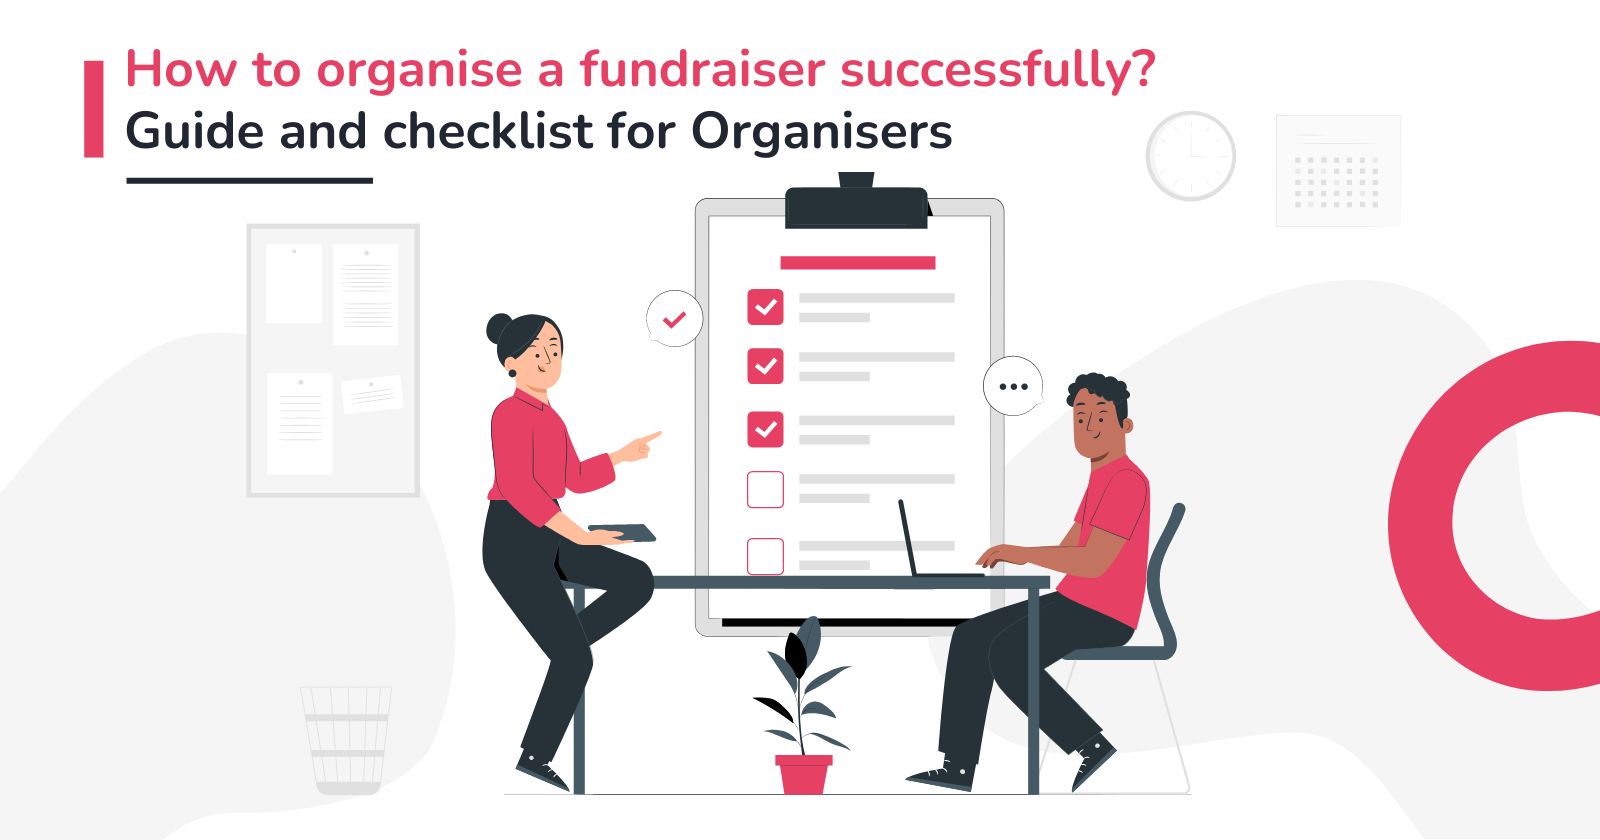 How to organise a fundraiser successfully? Guide and checklist for Organisers